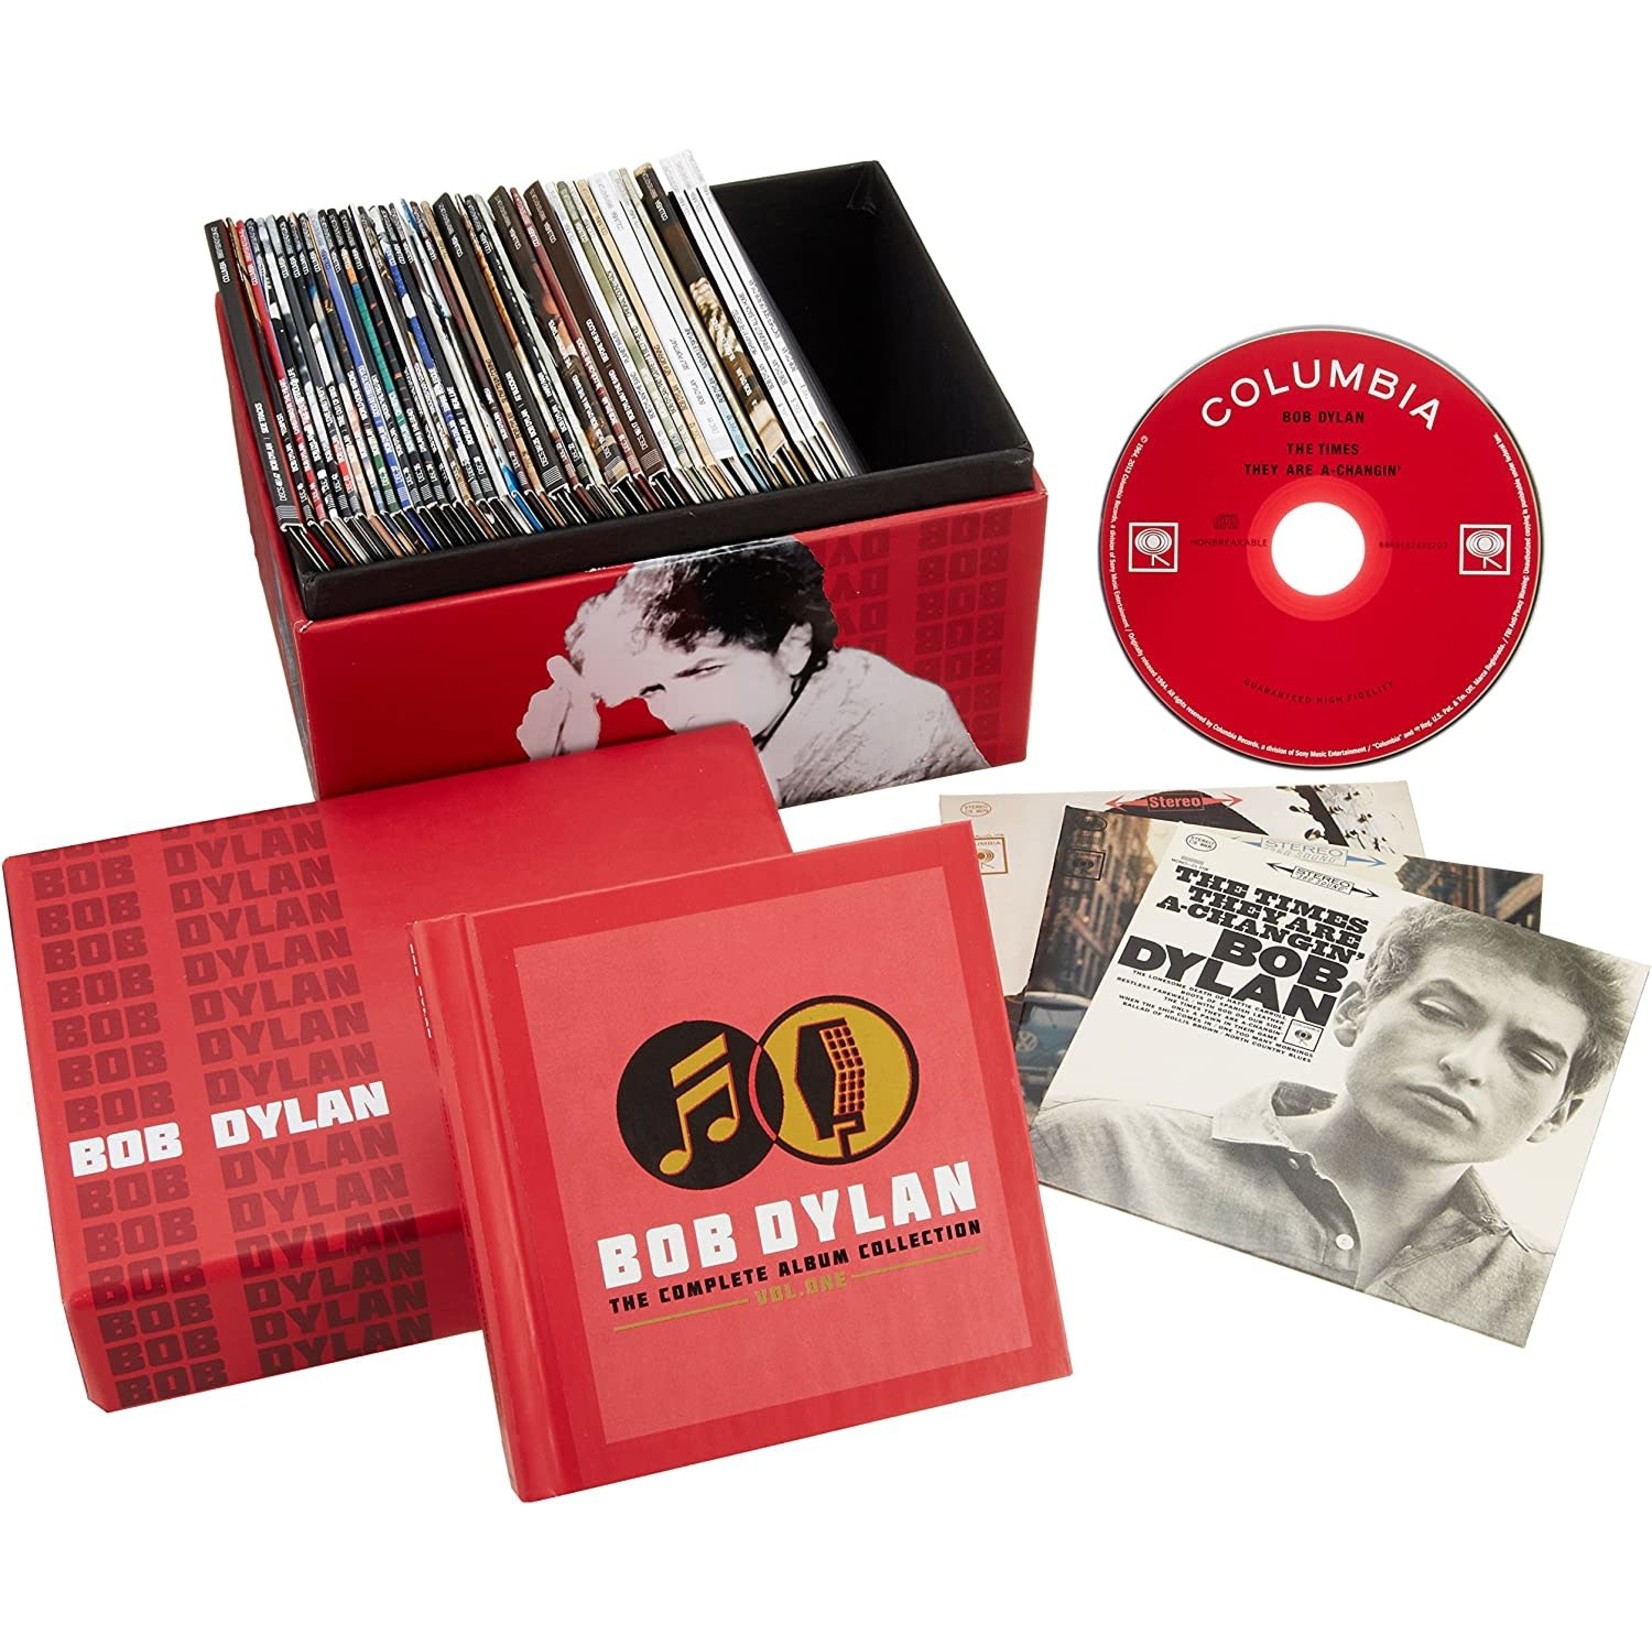 Compact Disc Bob Dylan - CD Box Set - The Complete Album Collection Vol. One